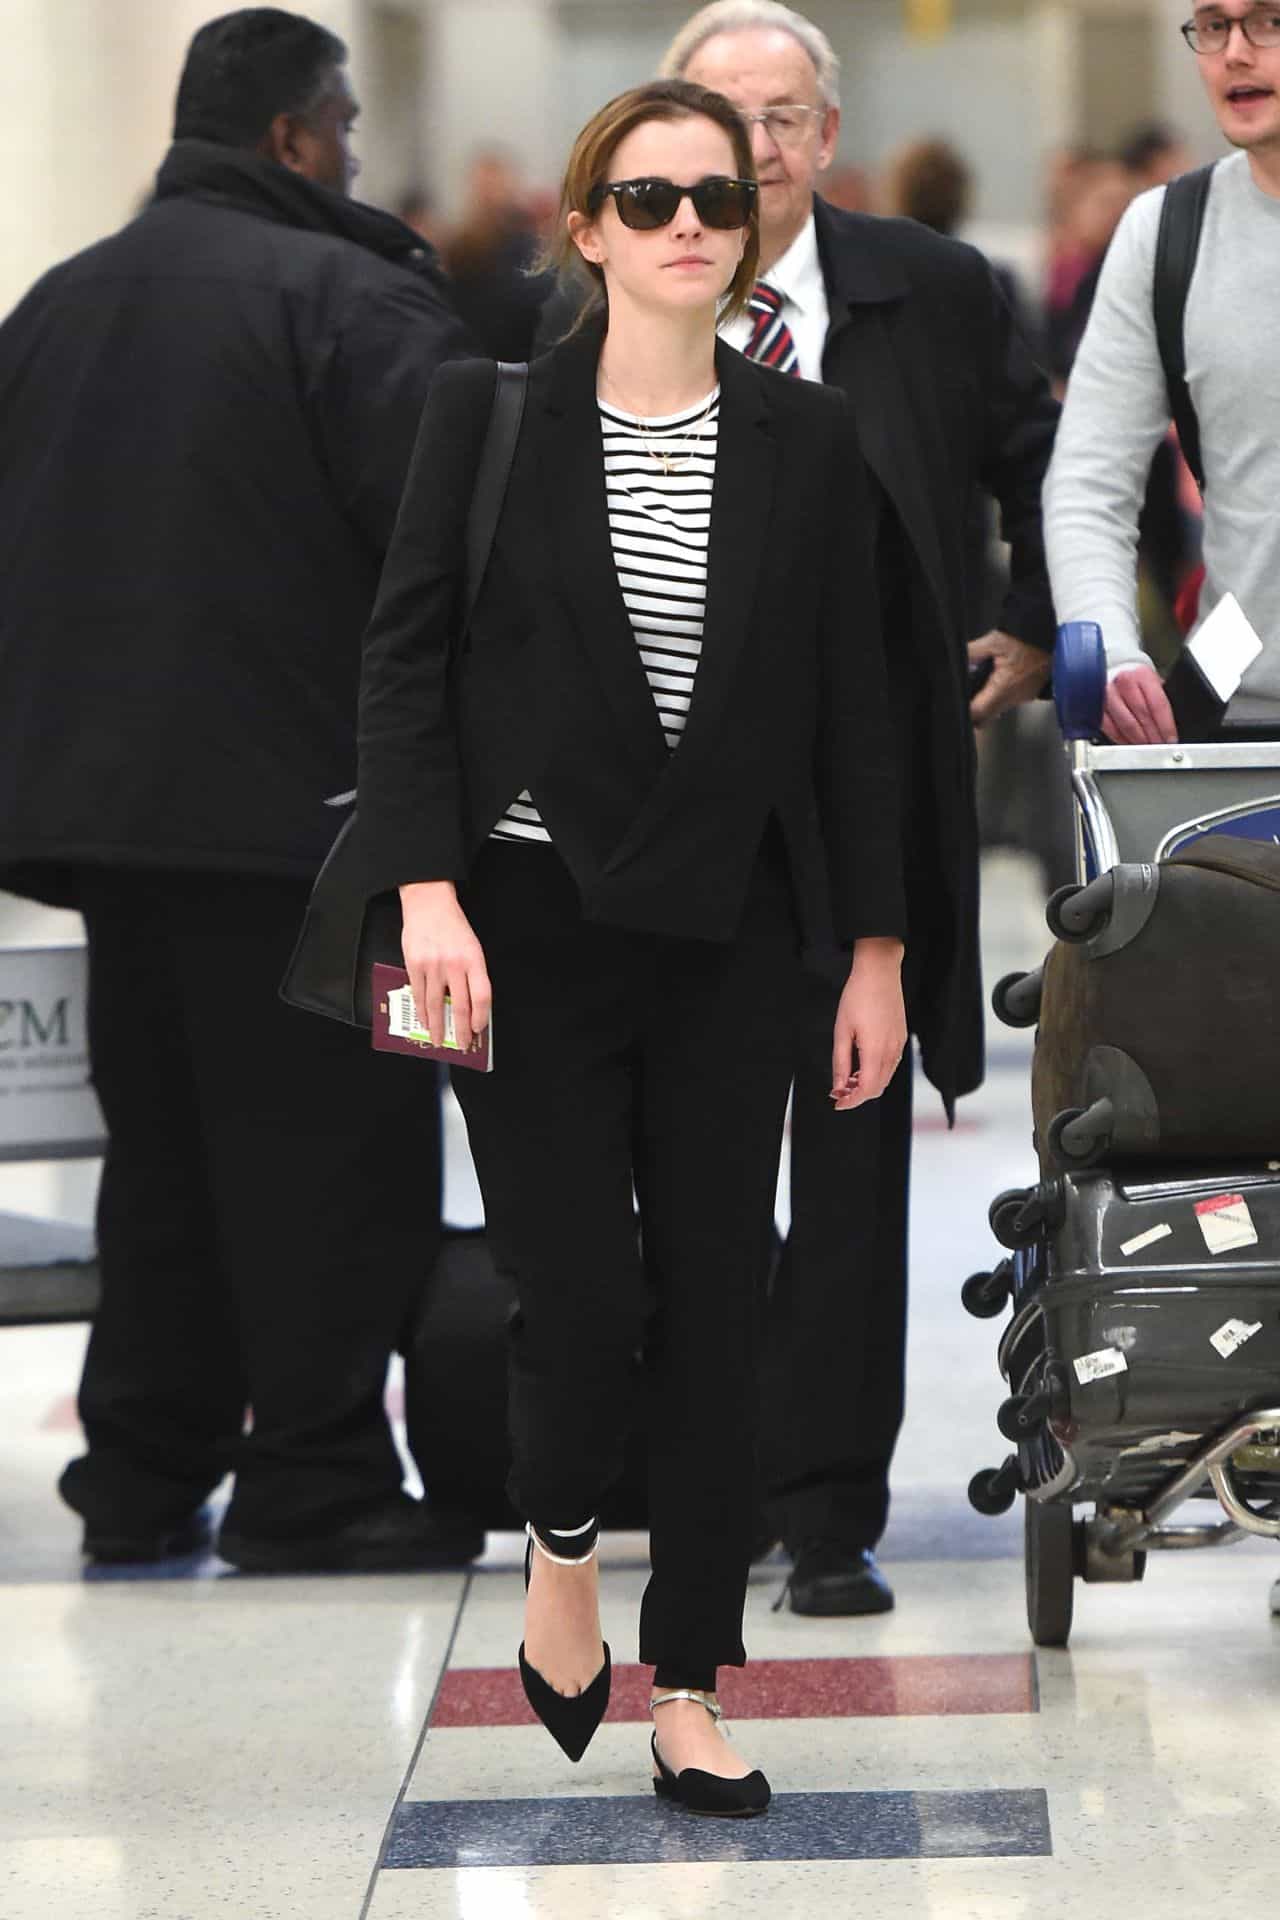 Emma Watson Arrives with Style at JFK Airport in a Striped Top and Blazer